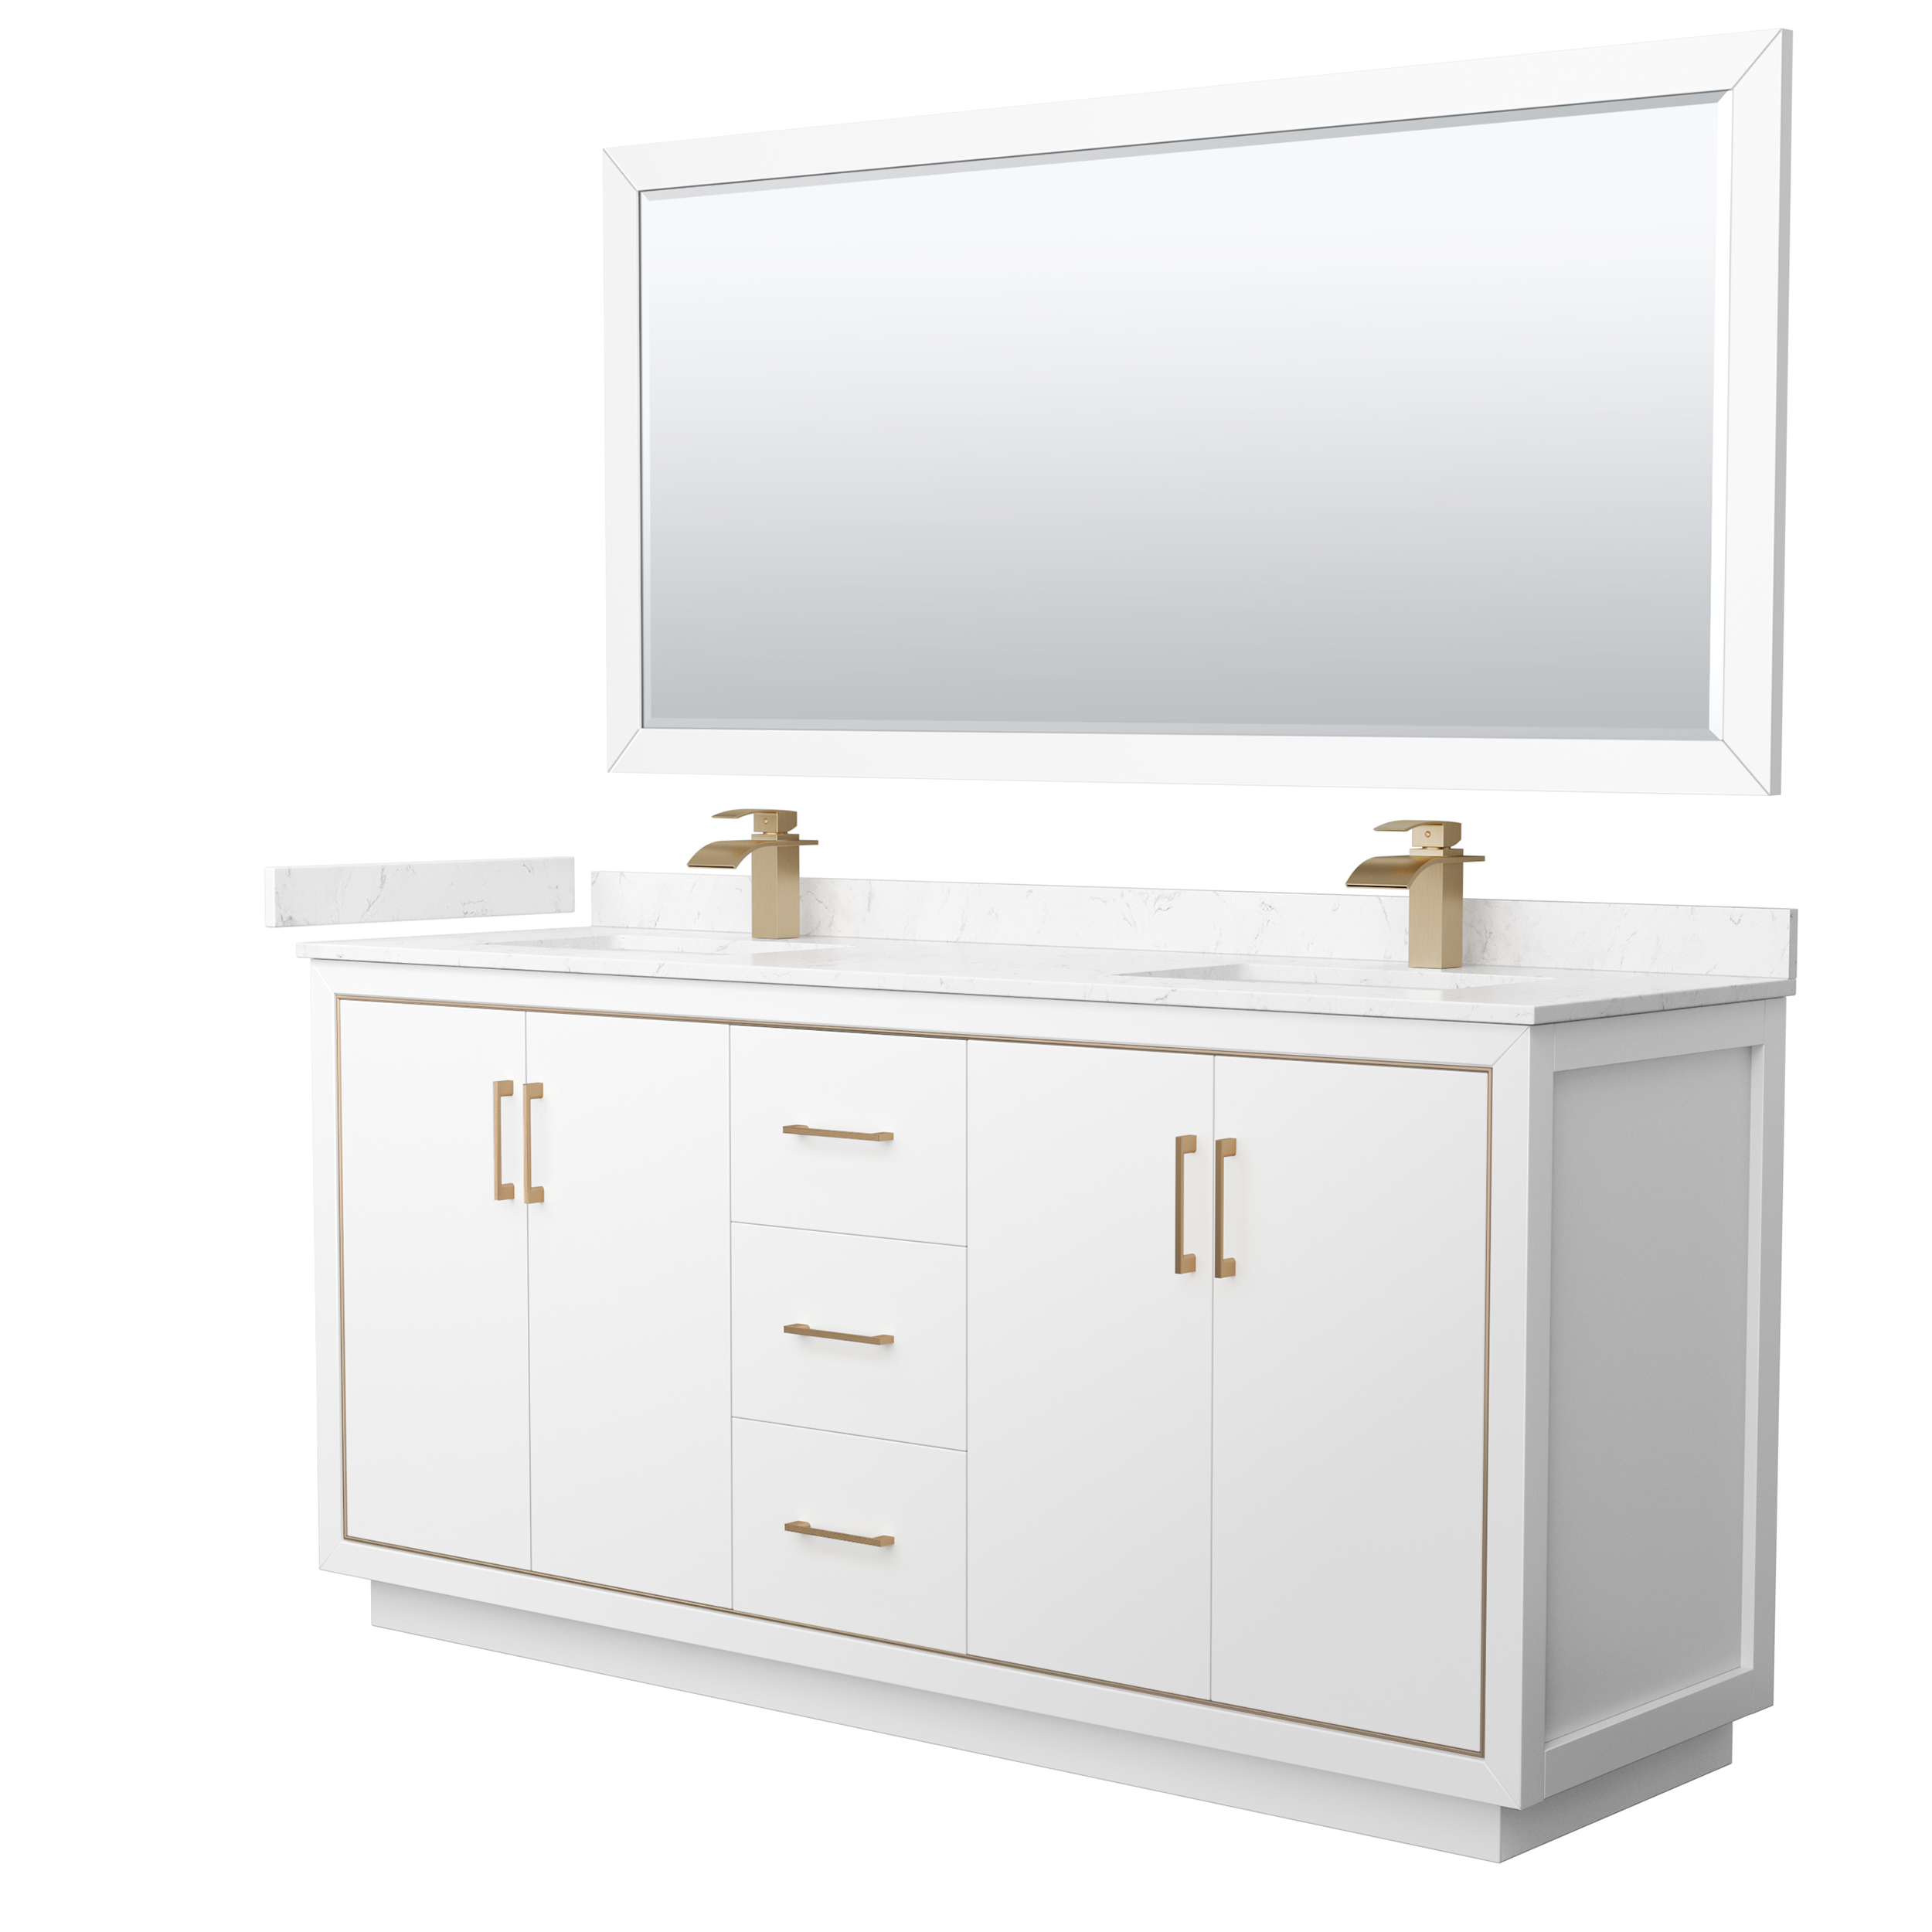 Icon 72" Double Vanity with optional Cultured Marble Counter - White WC-1111-72-DBL-VAN-WHT-